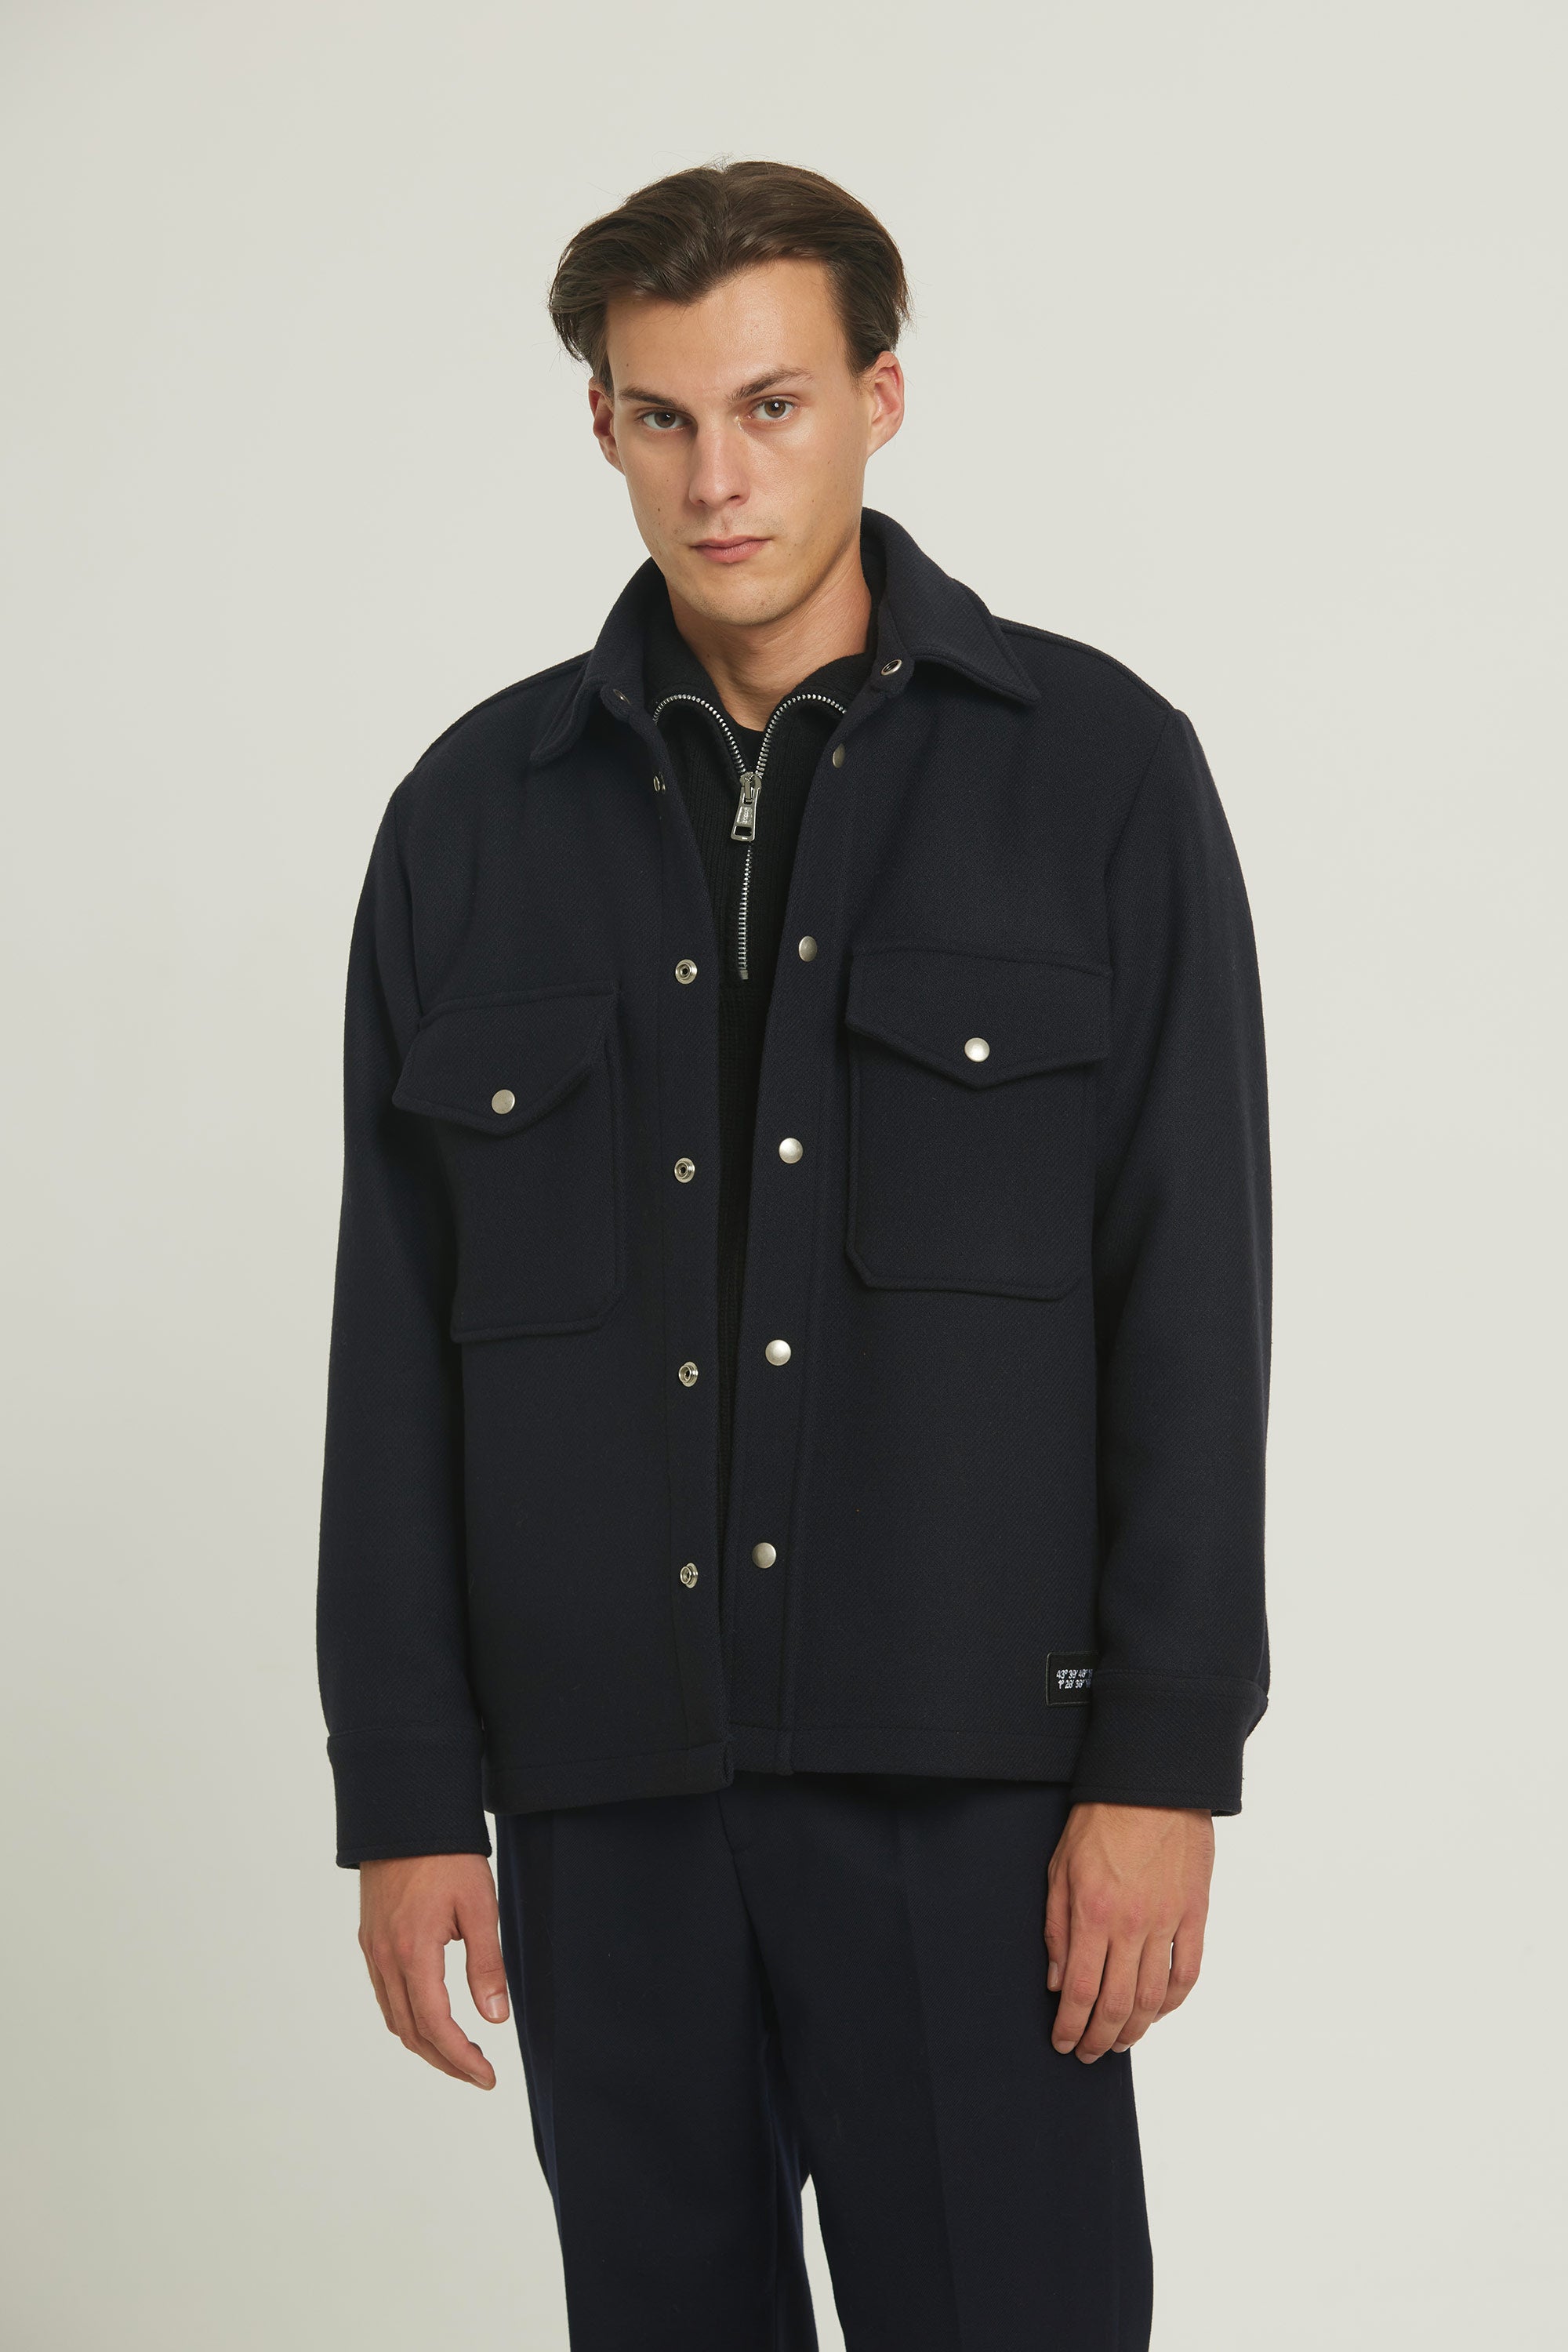 Overshirt jacket in wool "Cold Morning" - Navy